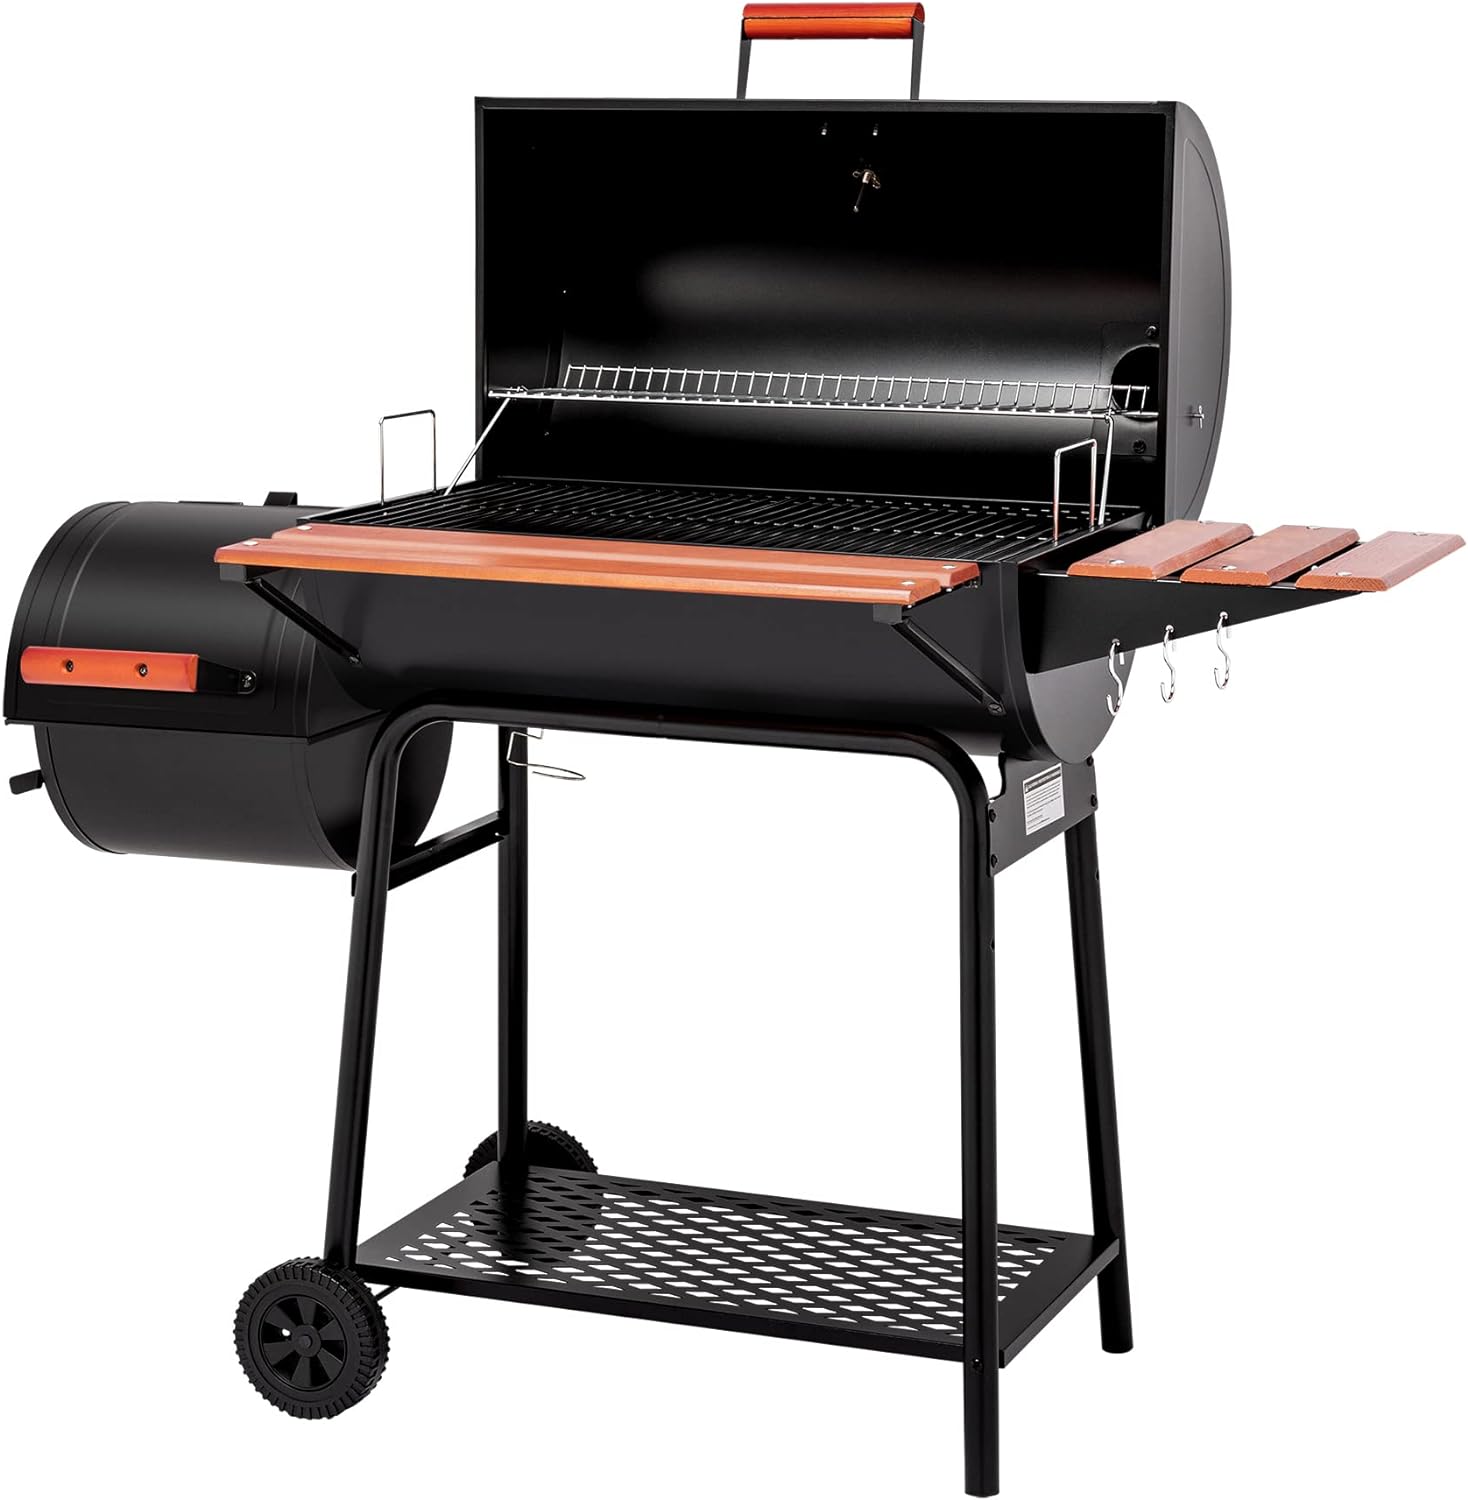 Royal Gourmet 30 Barrel Charcoal Grill with Side Table 627 Square Inches